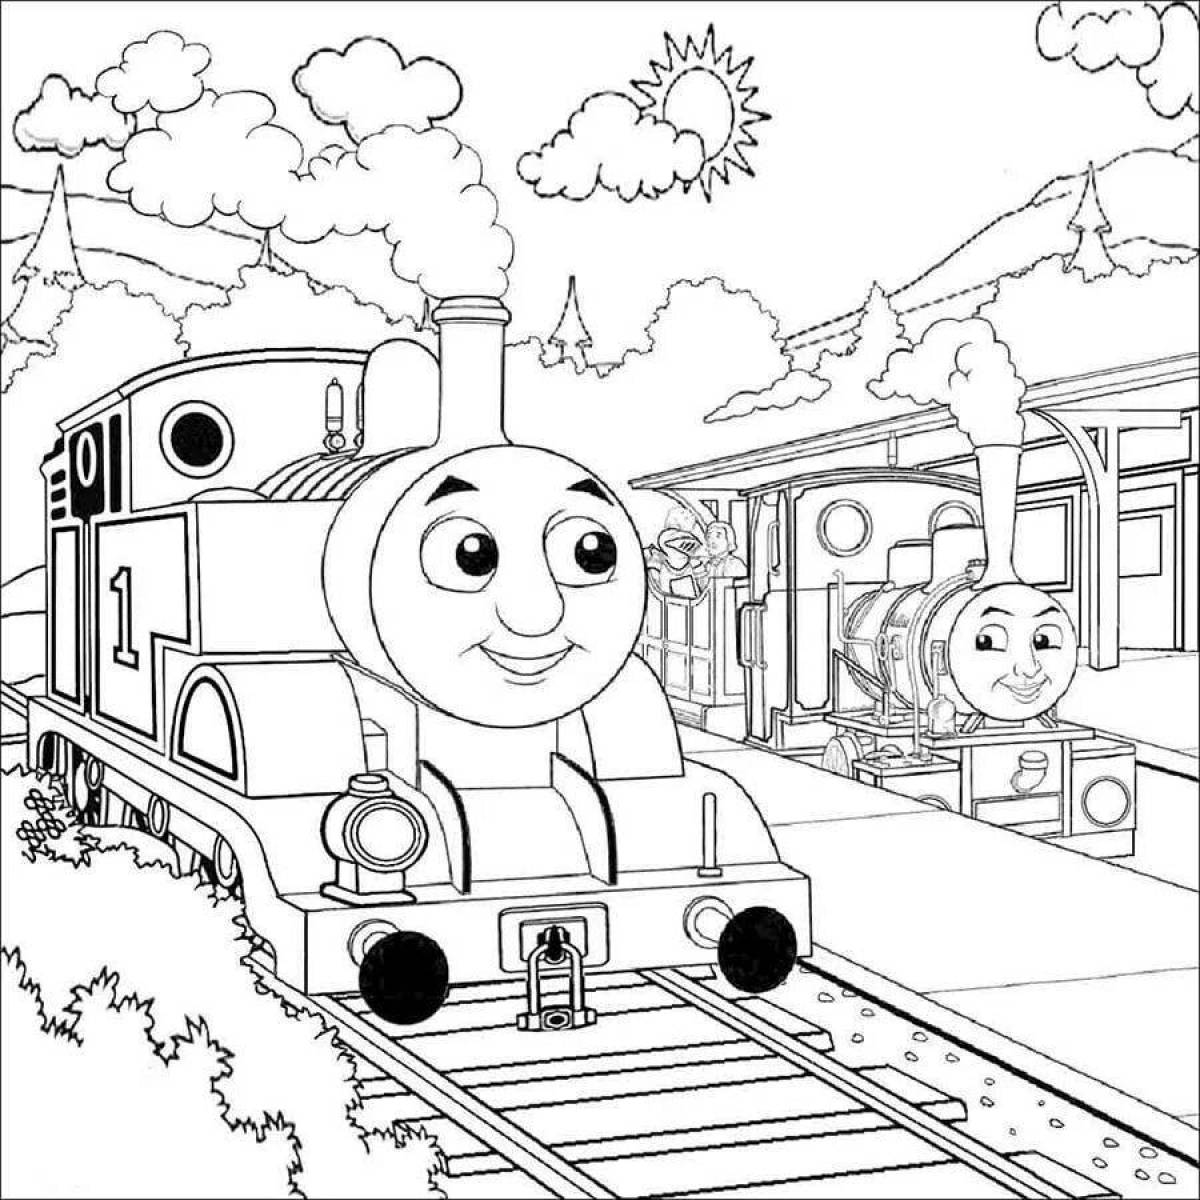 Fancy spider train coloring page